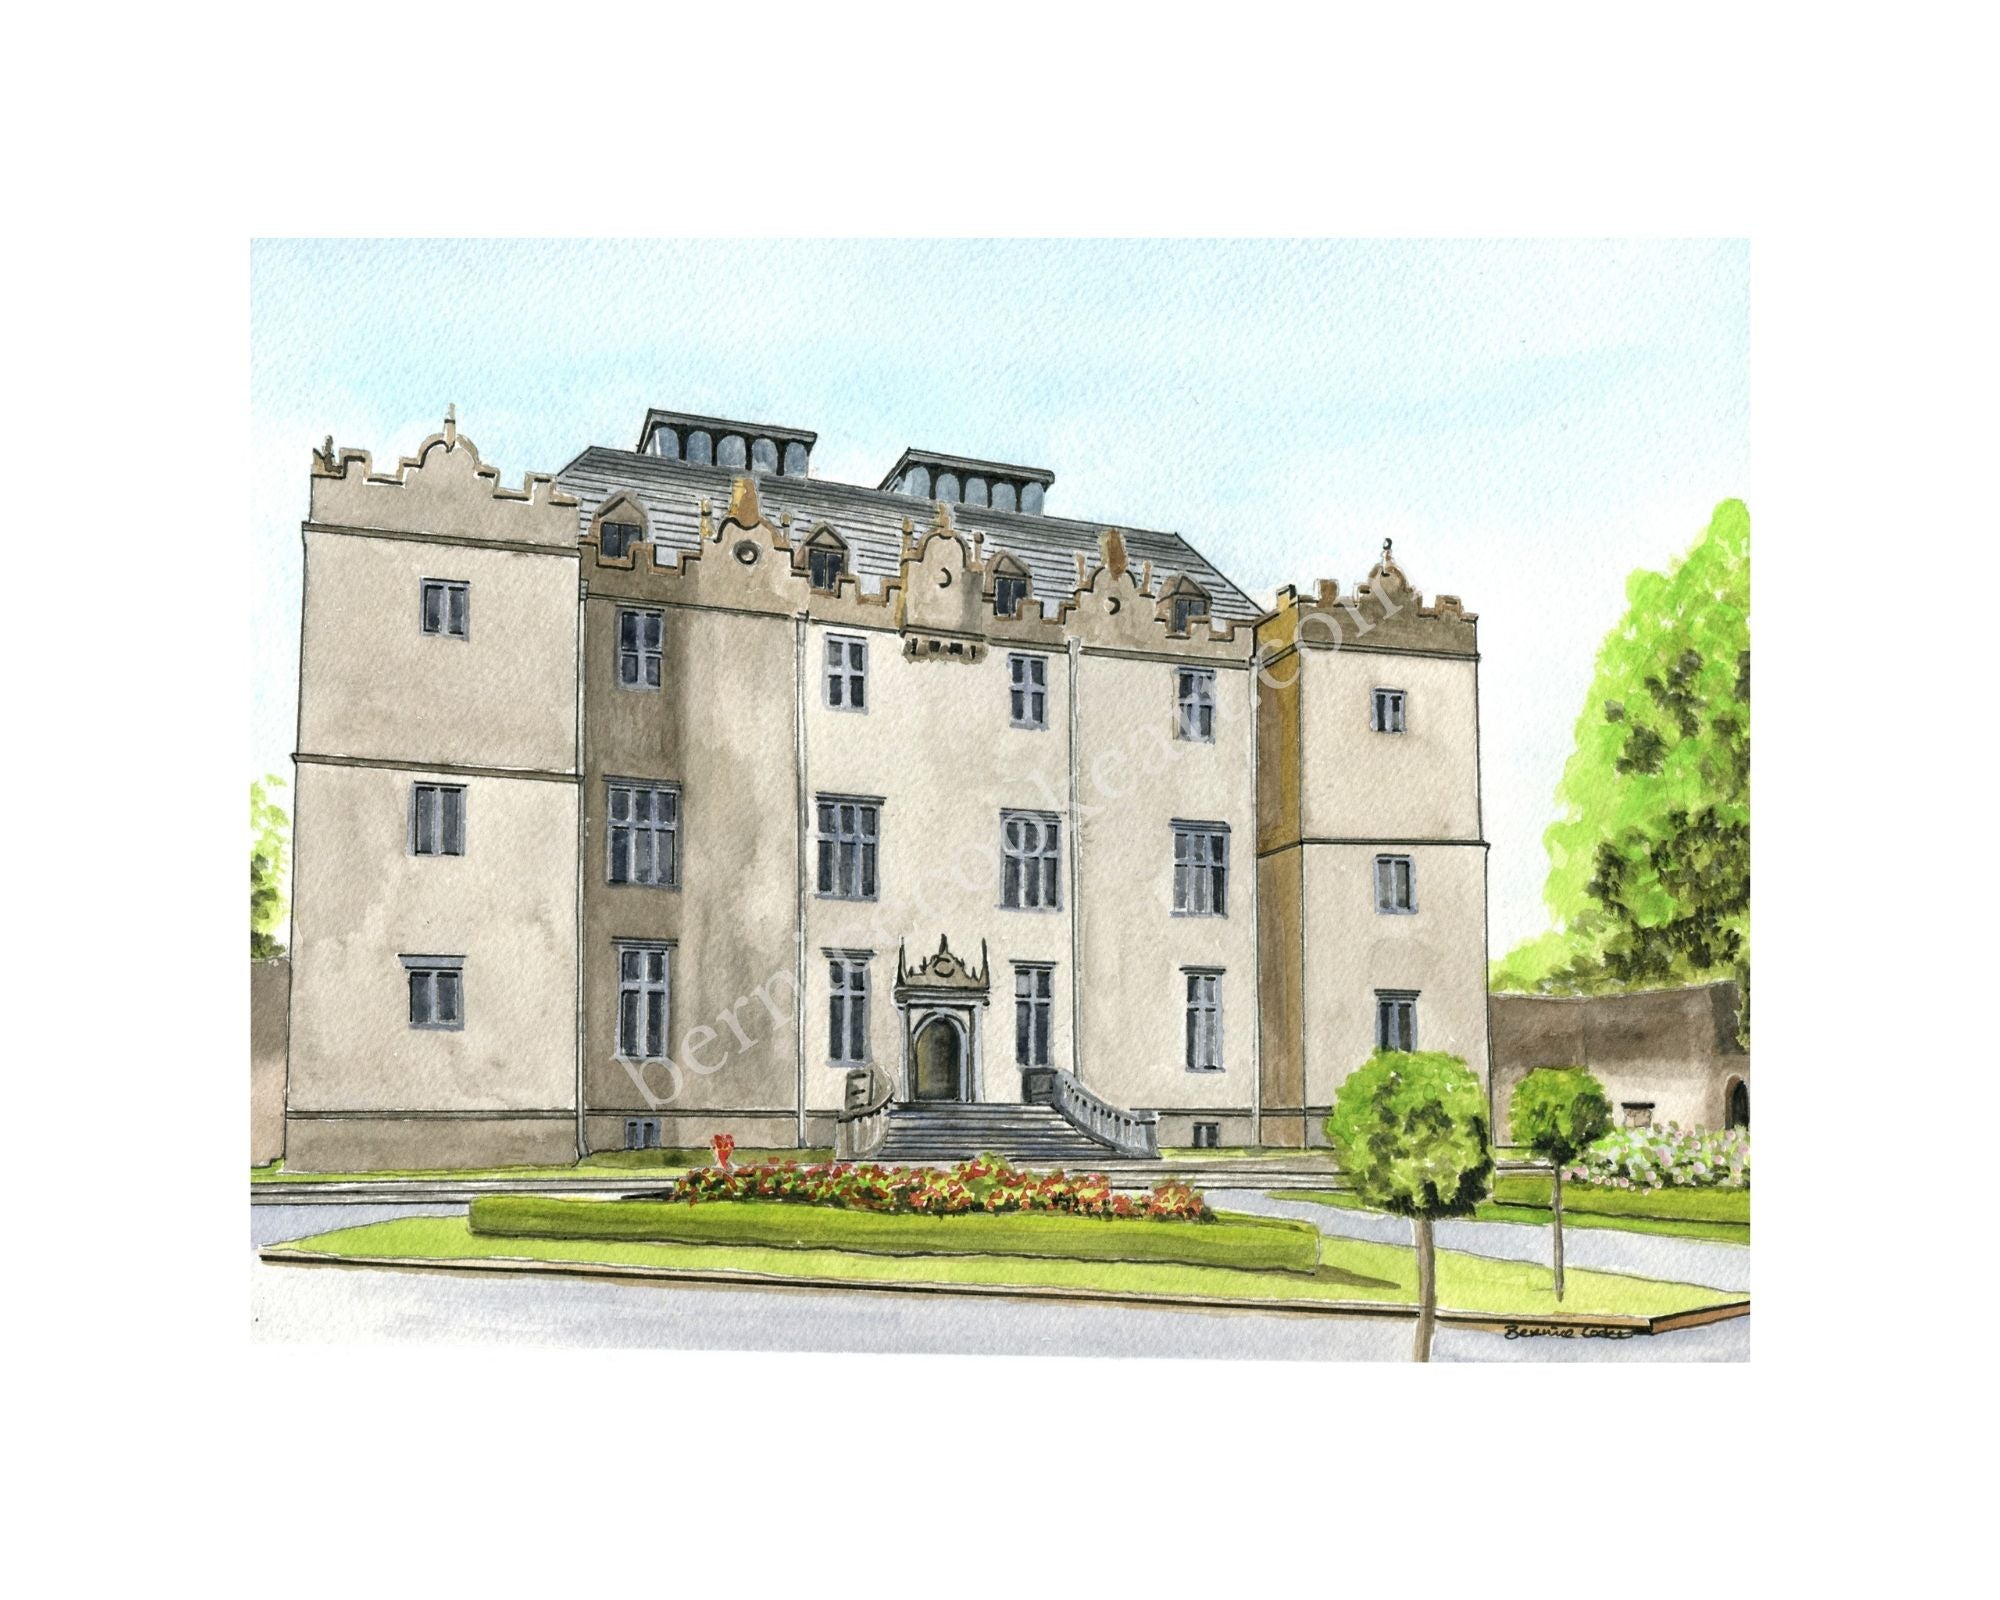 Summer at Portumna Castle, Co. Galway - Pen & Watercolor Sketch - Giclée Print by Bernice Cooke - mounted to 10" x 8".